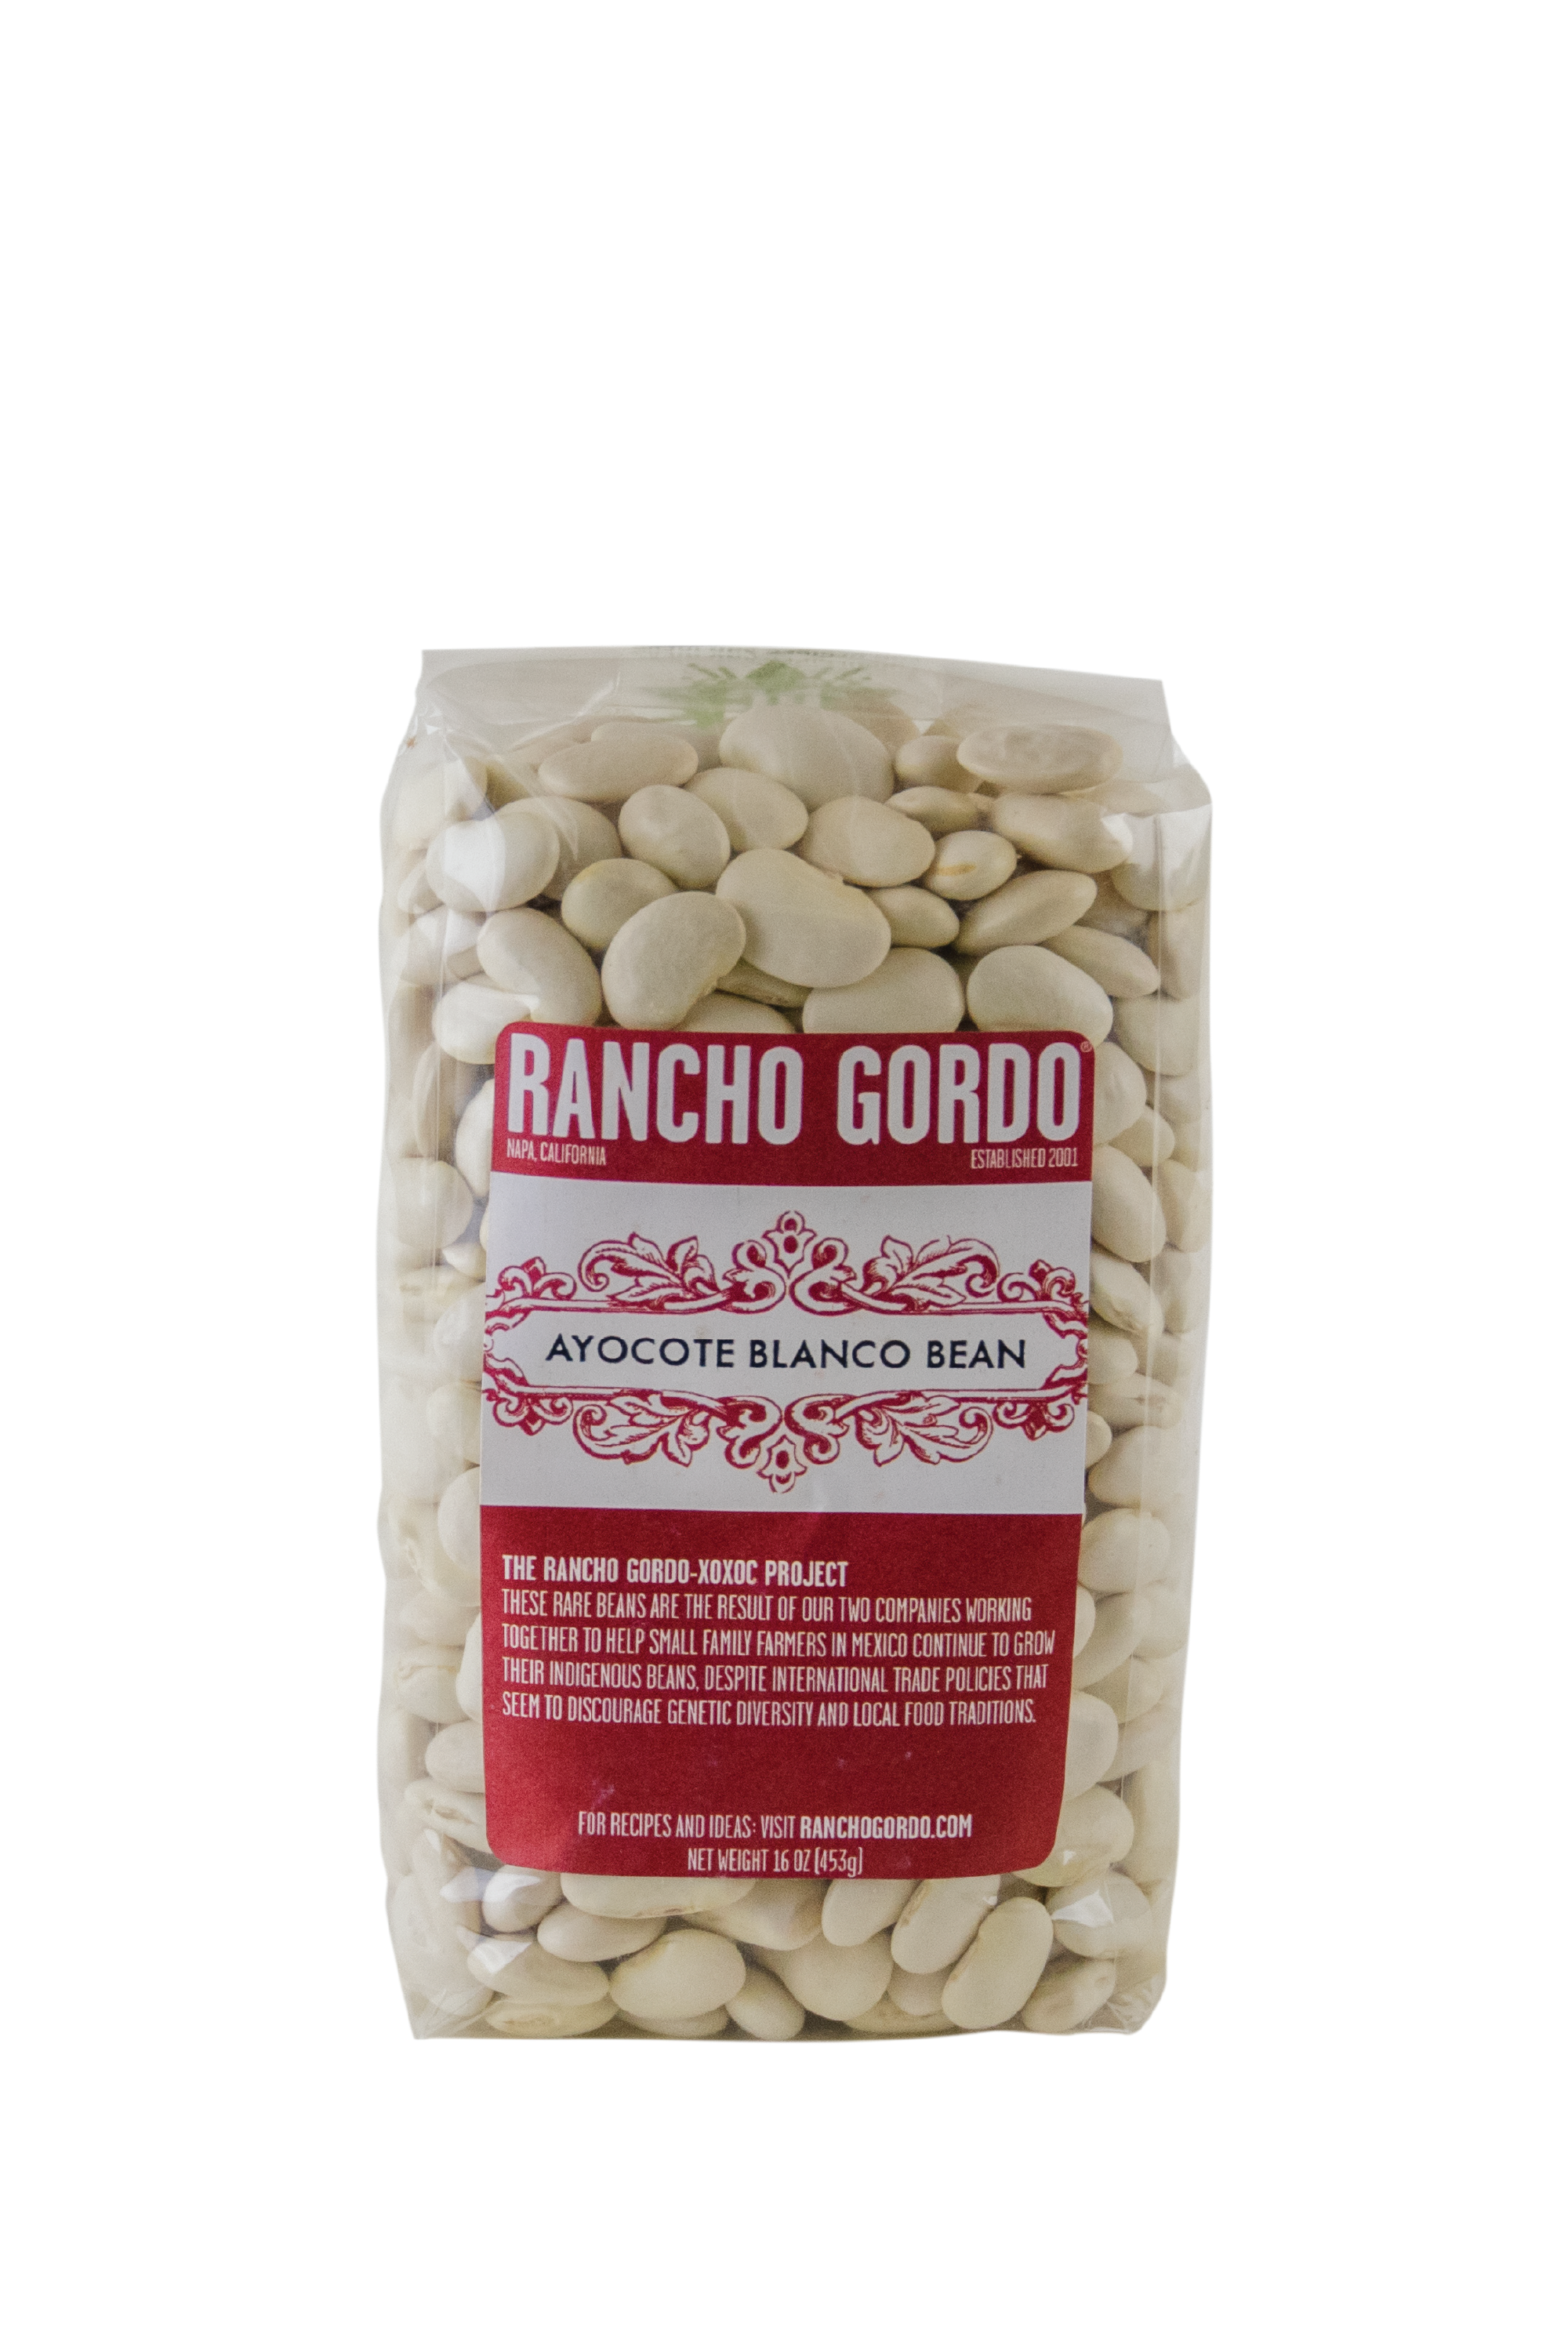 A One Pound Bag of Rancho Gordo Acoyote Morado Beans on a white background. Red and white label. Additional text on bag reads: The Rancho Gordo-Xoxoc Project. These rare beans are the result of our two companies working together to help small family farmers in Mexico continue to grow their indigenous beans, despite international trade policies that seem to discourage genetic diversity & local food traditions.